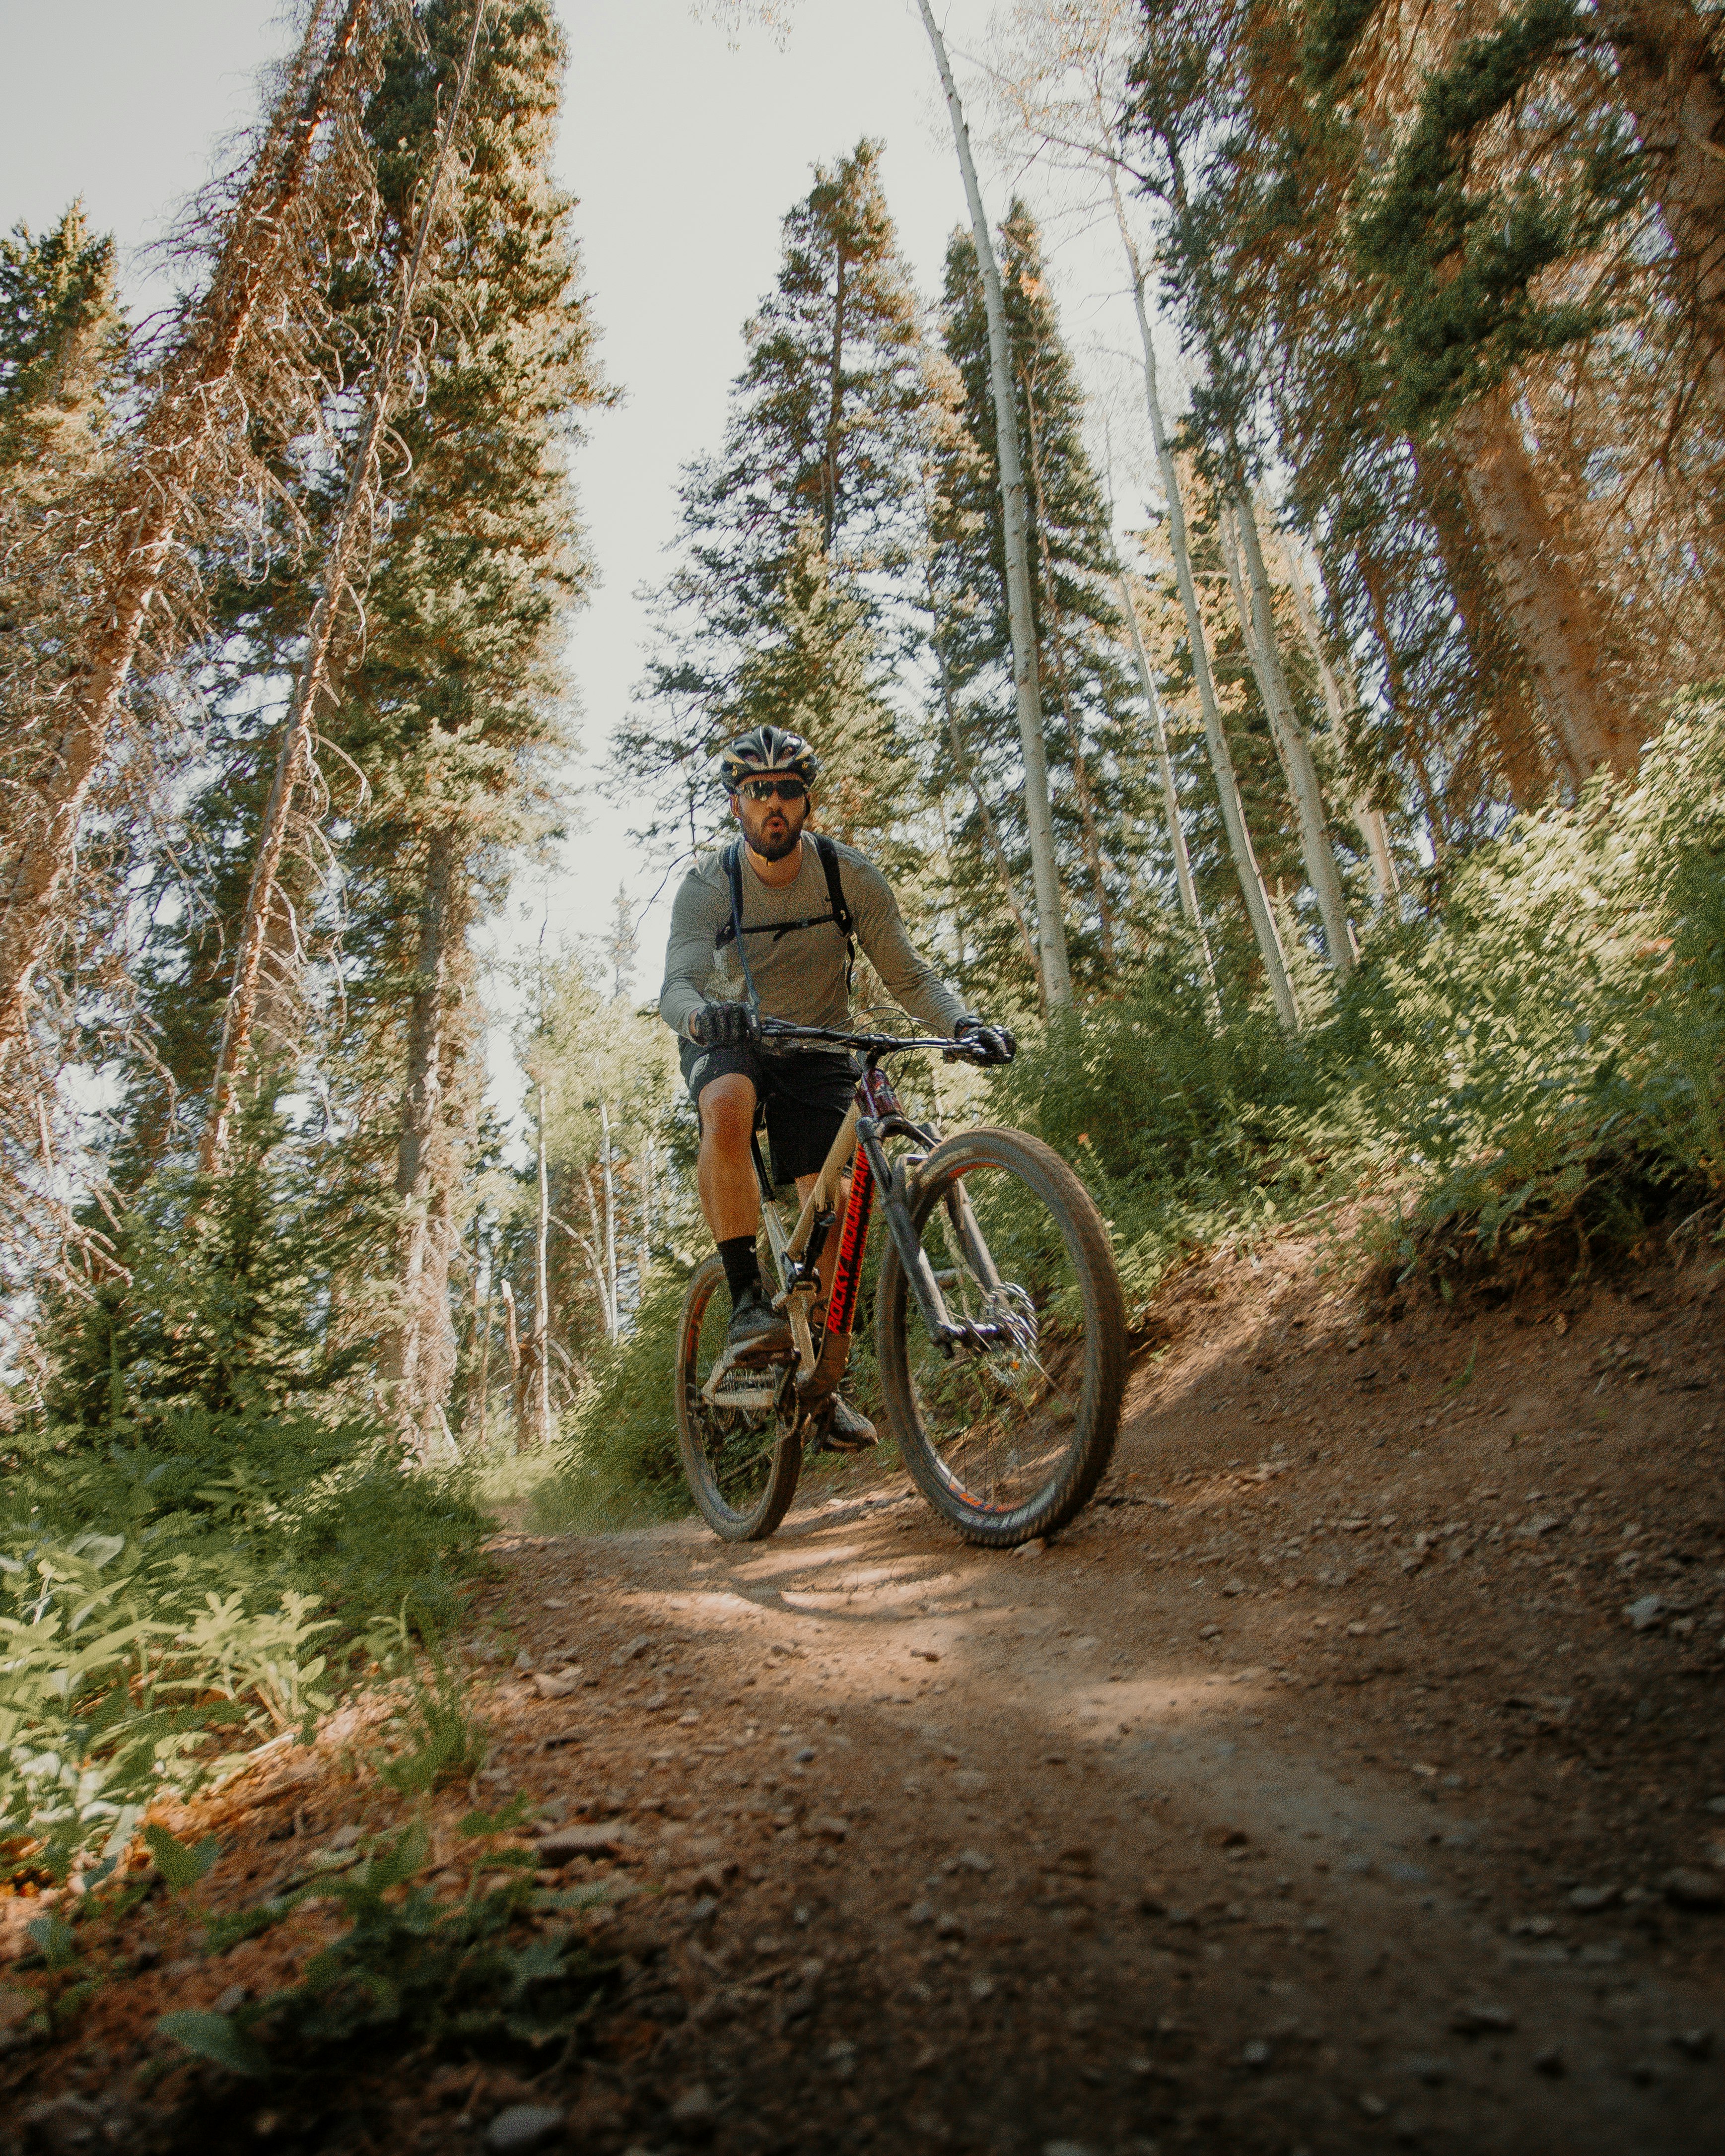 man in gray shirt riding on mountain bike in forest during daytime